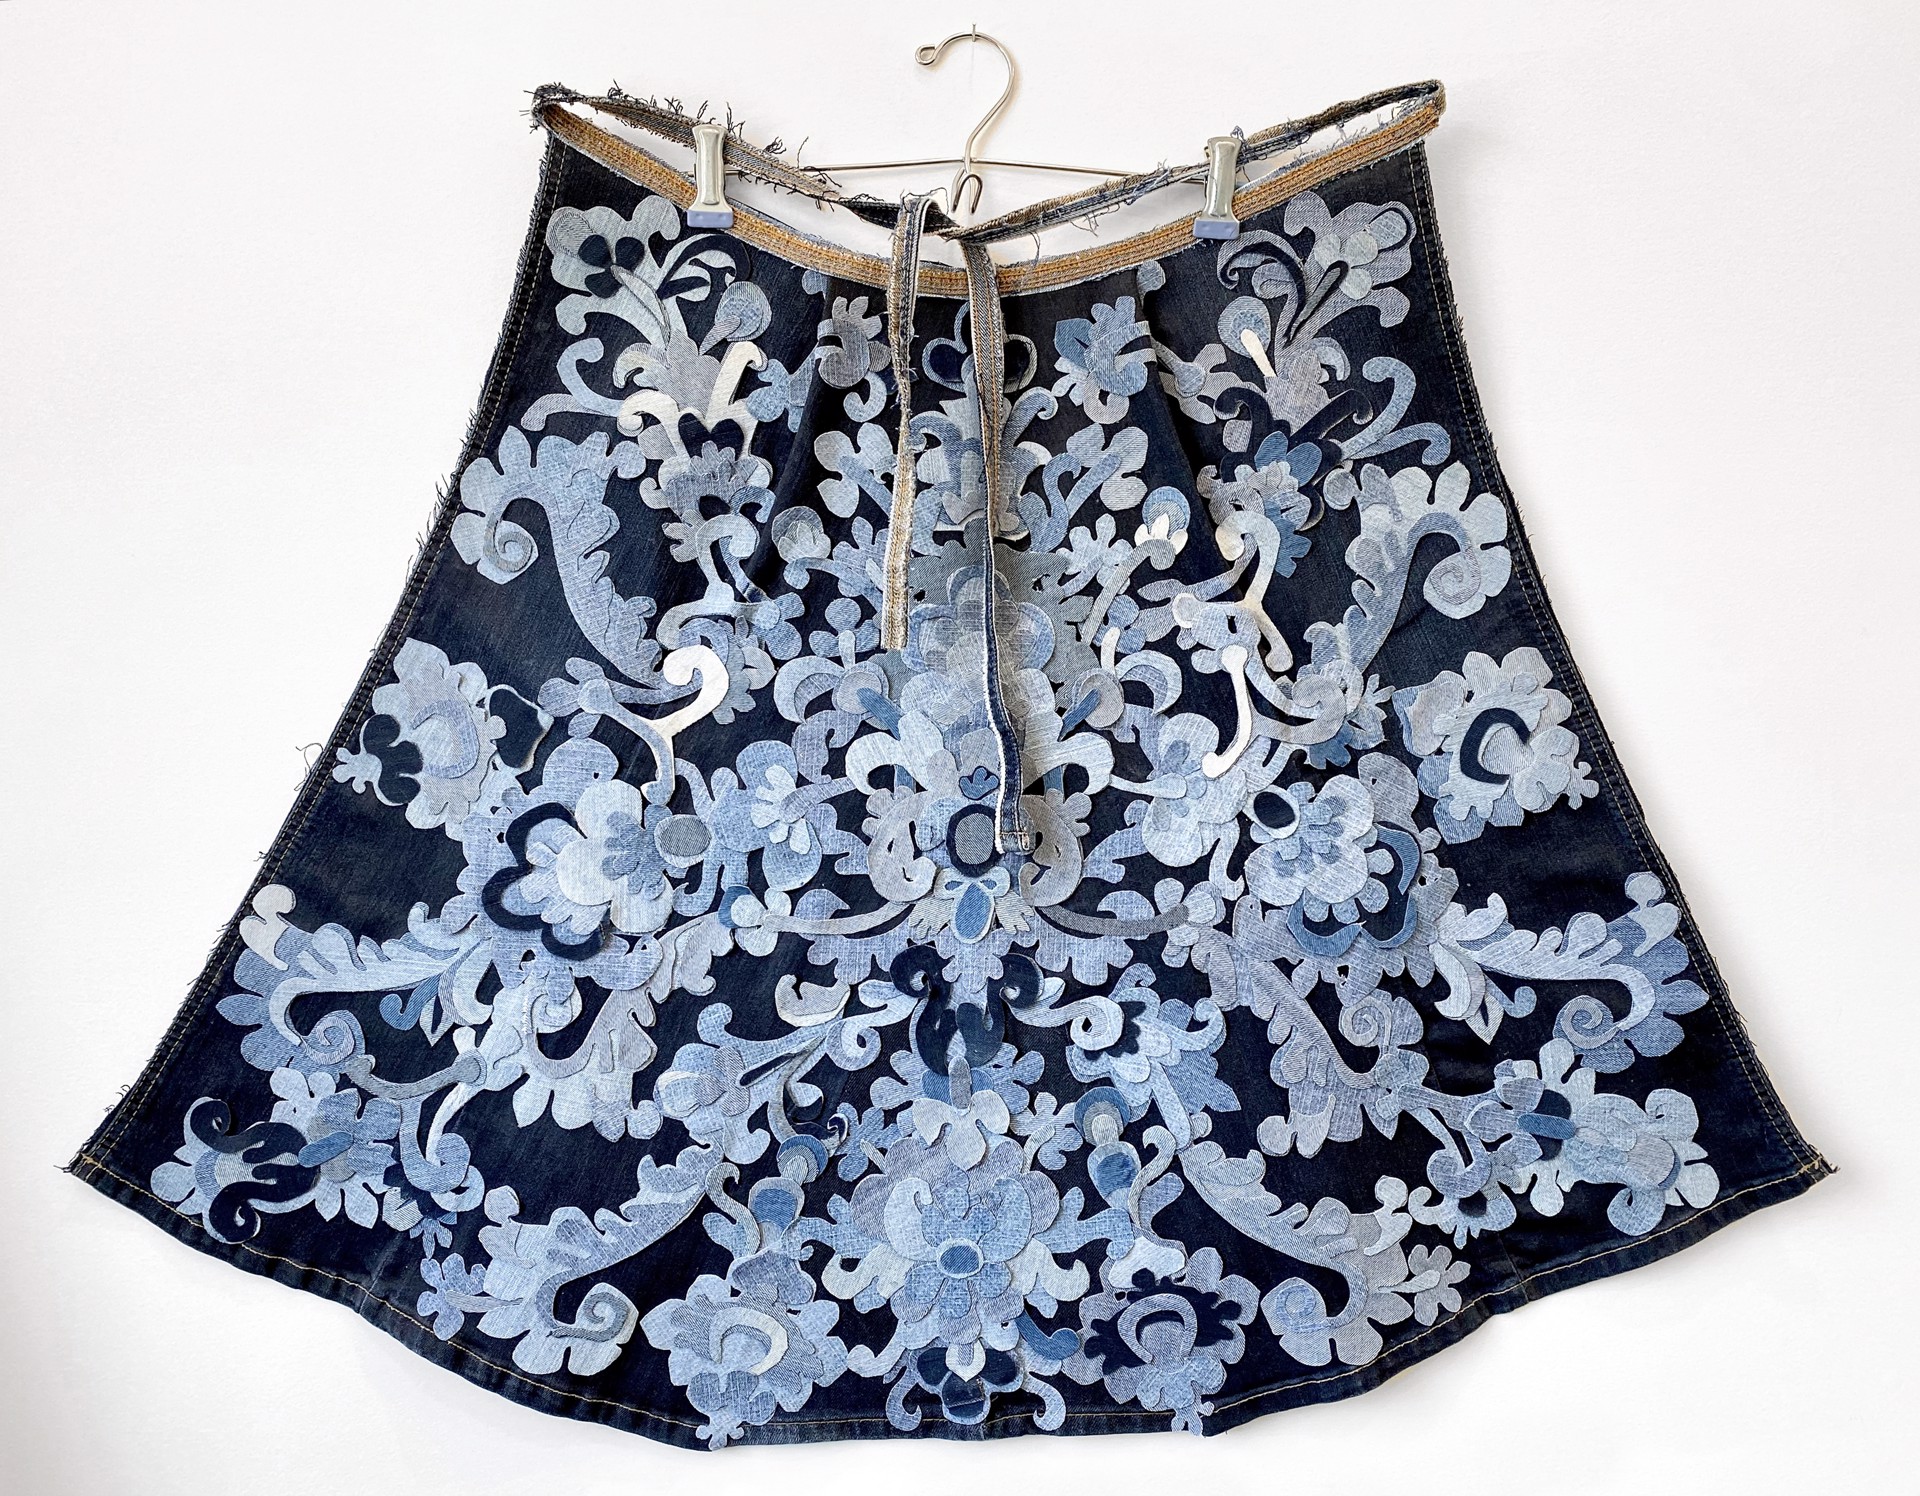 Meticulously Distressed Denim Cape, Gros Point Needle Lace by Libby Newell